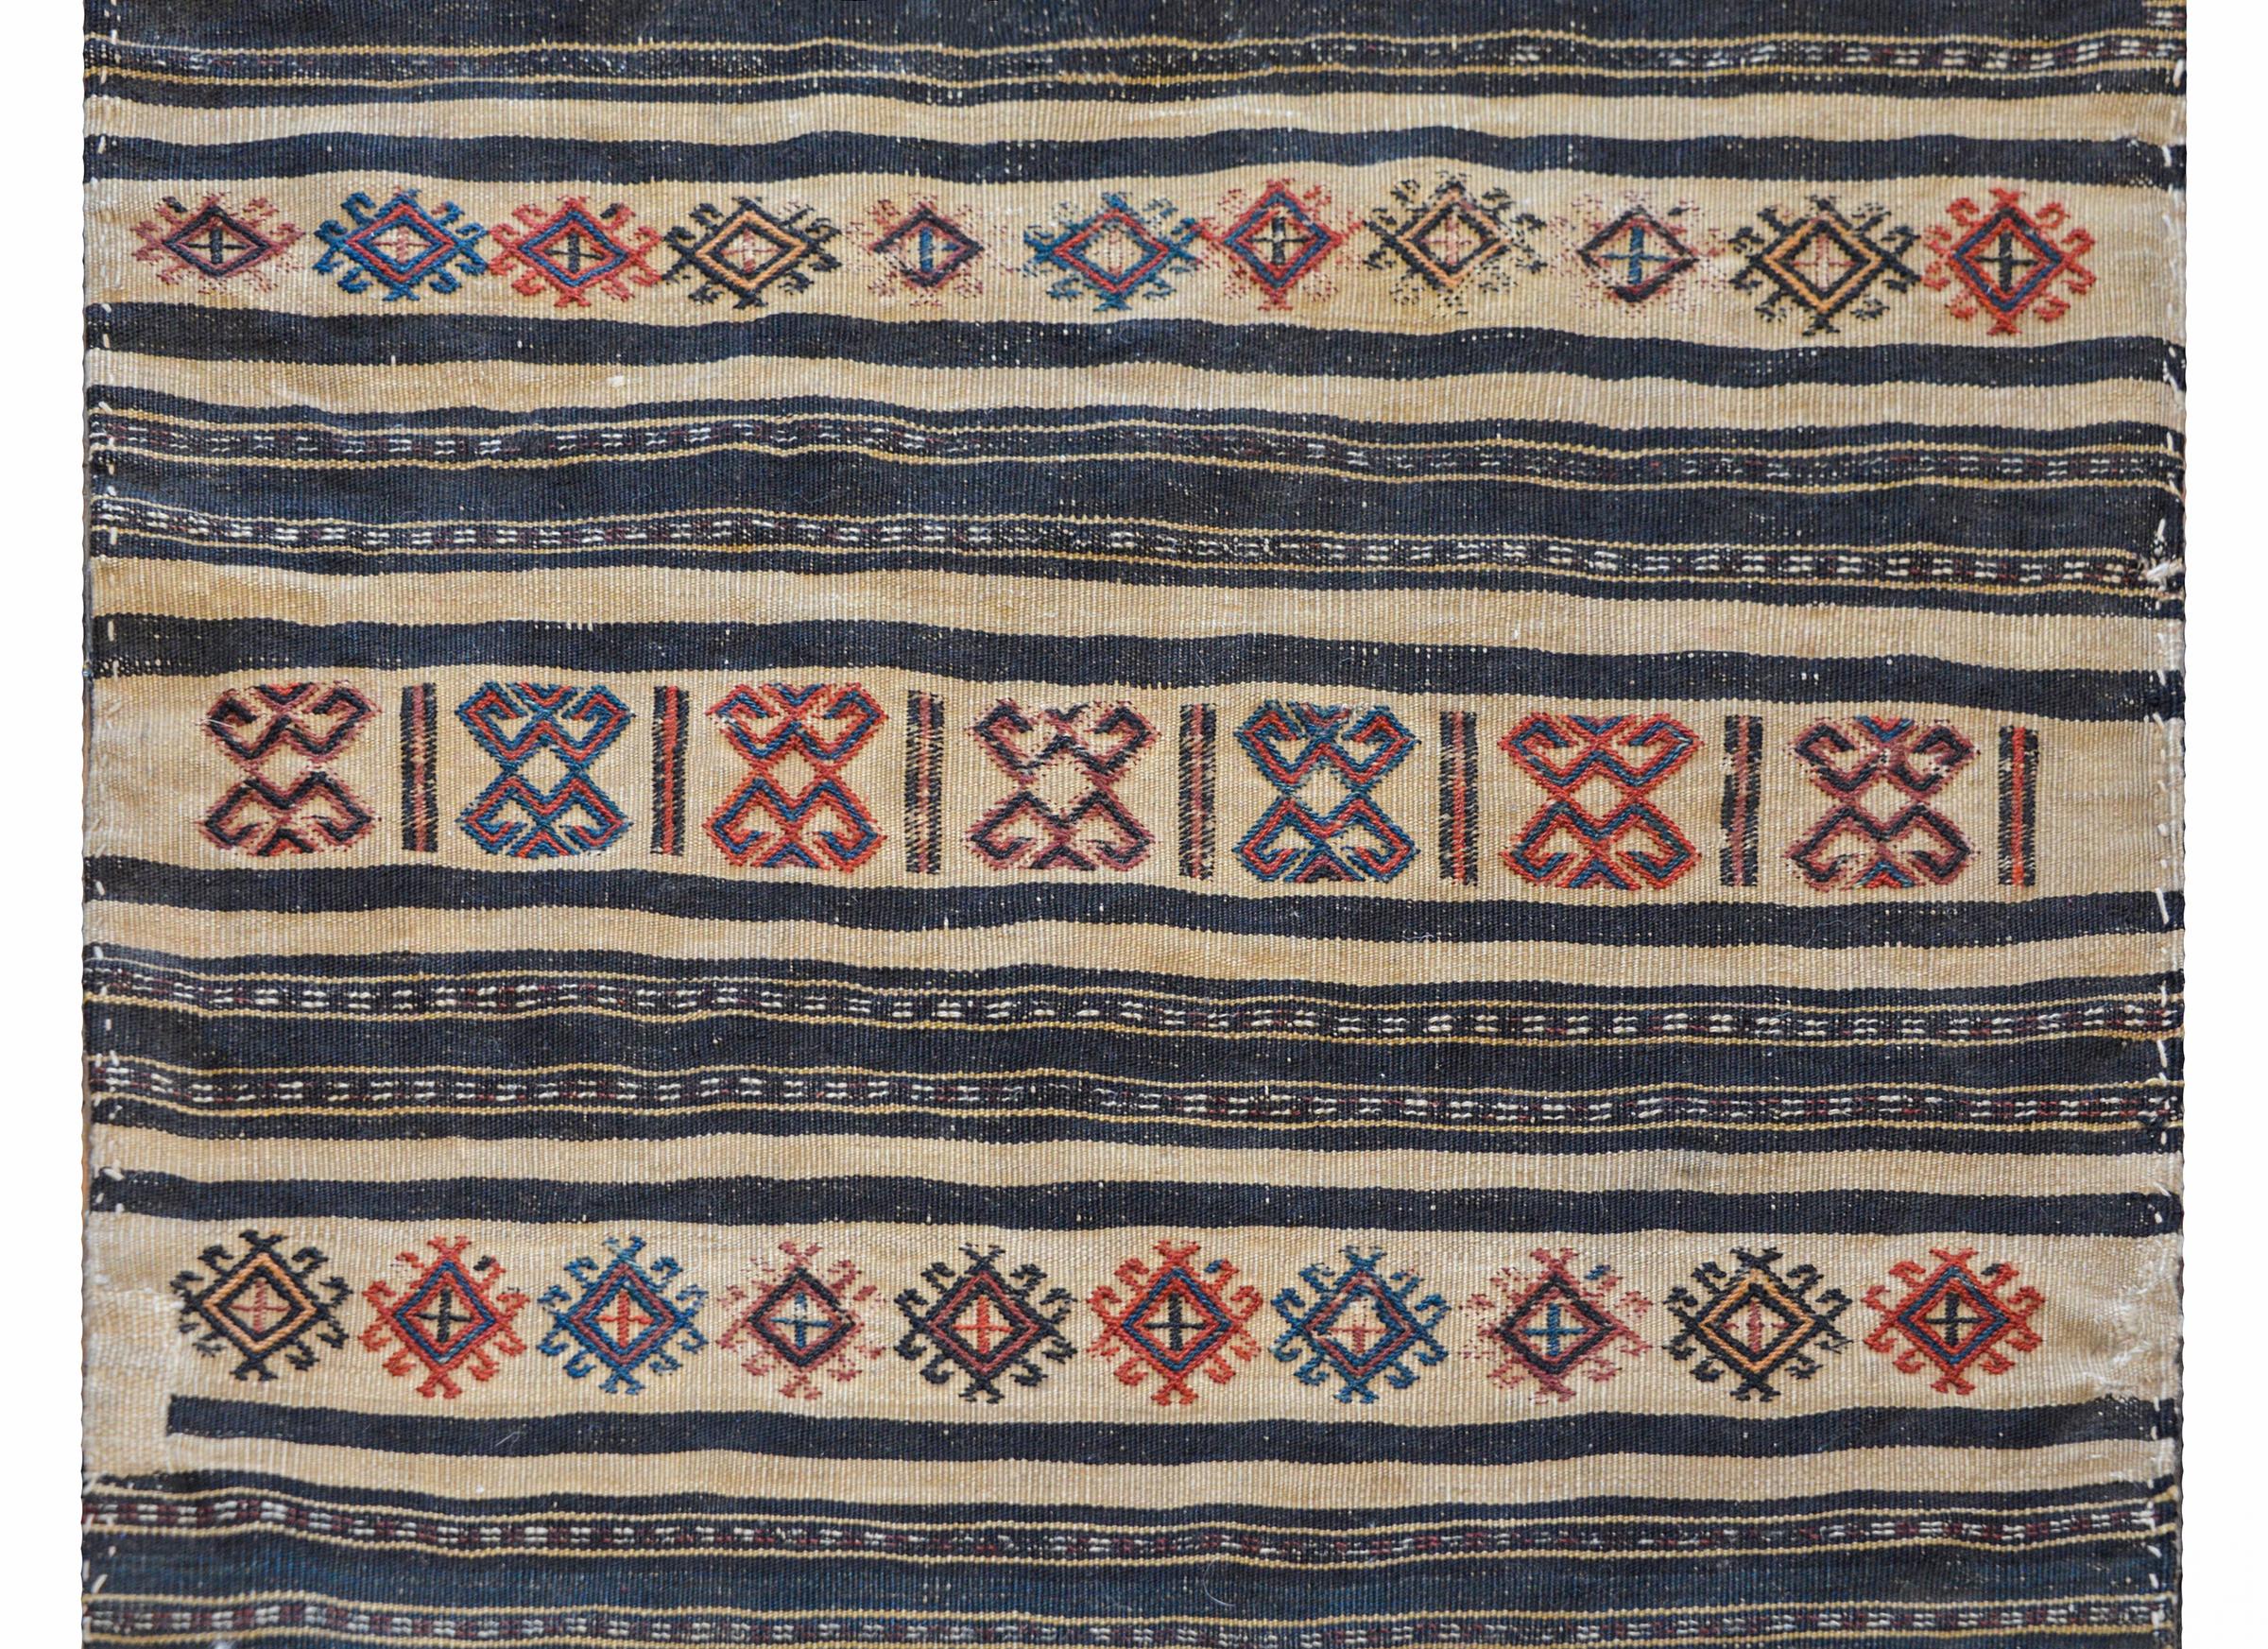 A beautiful early 20th century Persian Afshar Grain bag face rug with a wonderful striped pattern containing solid indigo colored woven stripes embellished with crimson, gold, and light and dark indigo embroidered designs.